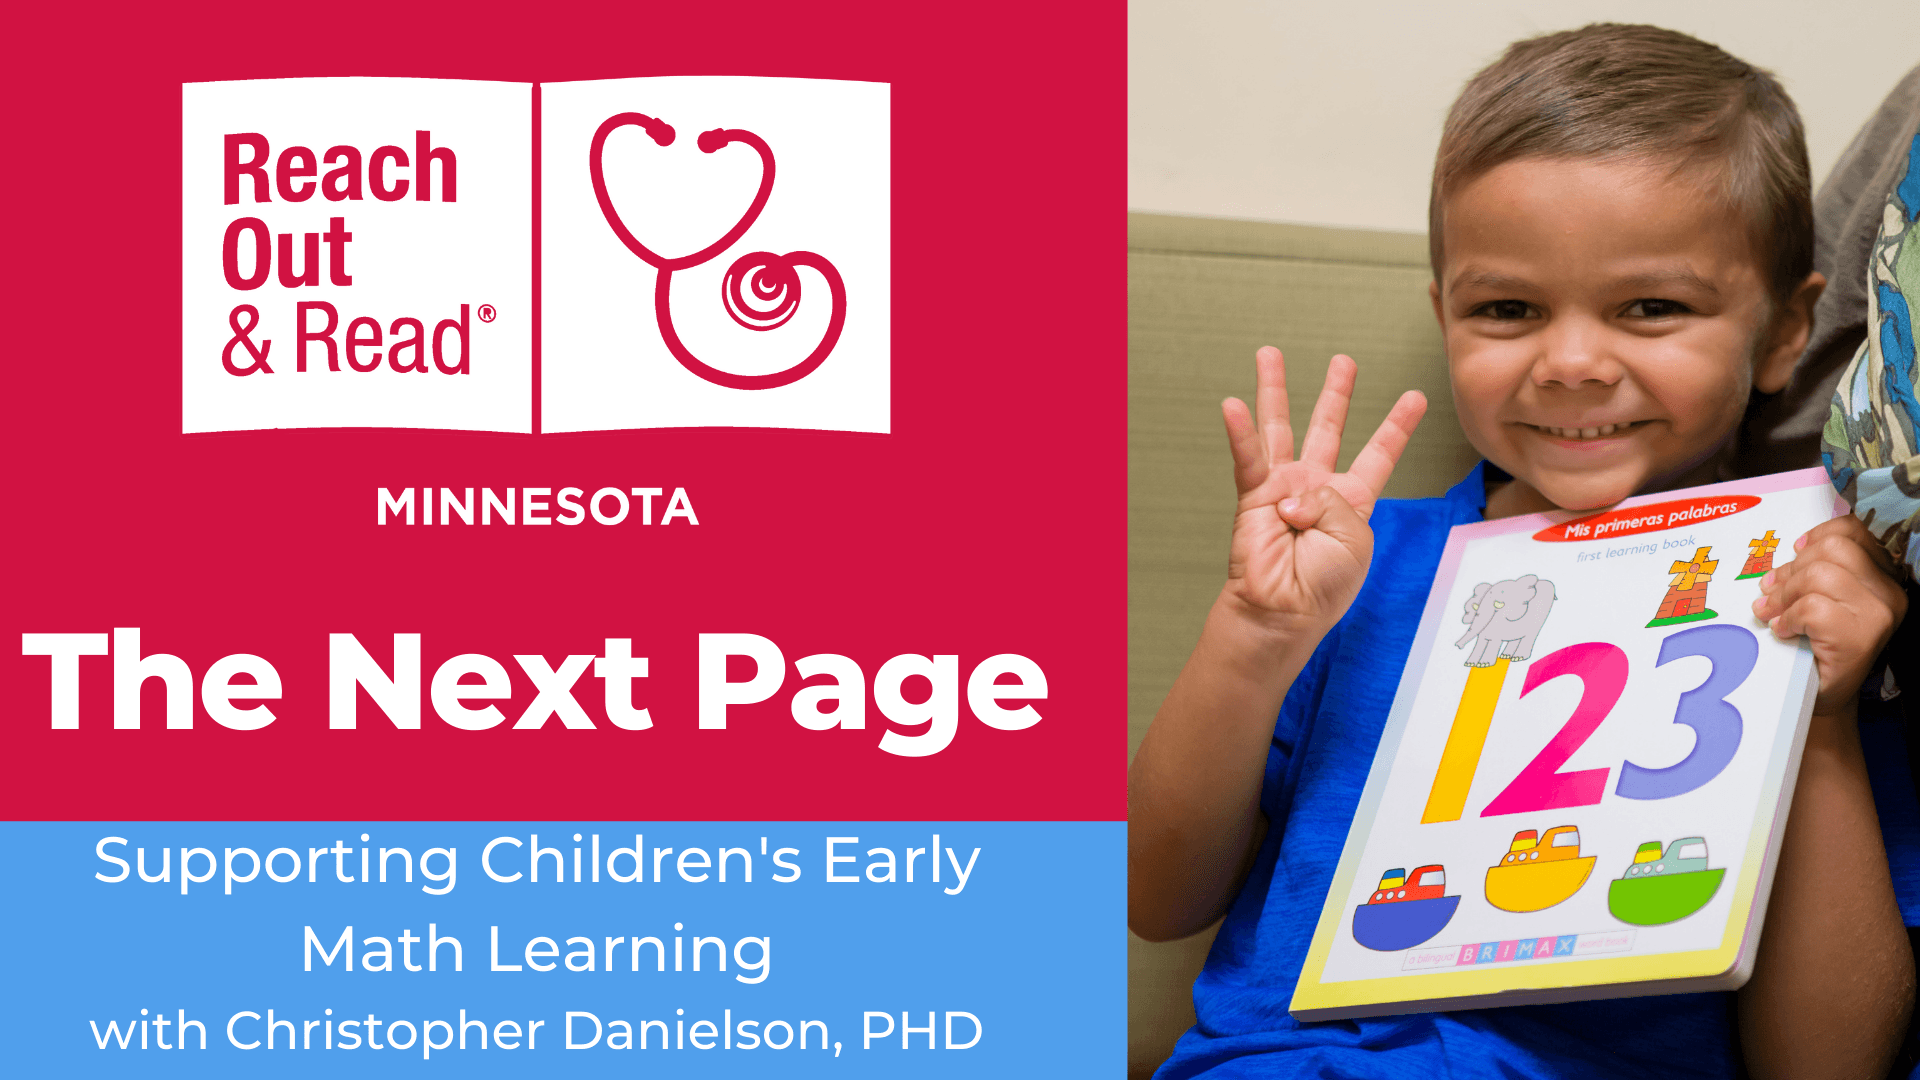 The Next Page: Supporting Children's Early Math Learning with Christopher Danielson, PhD